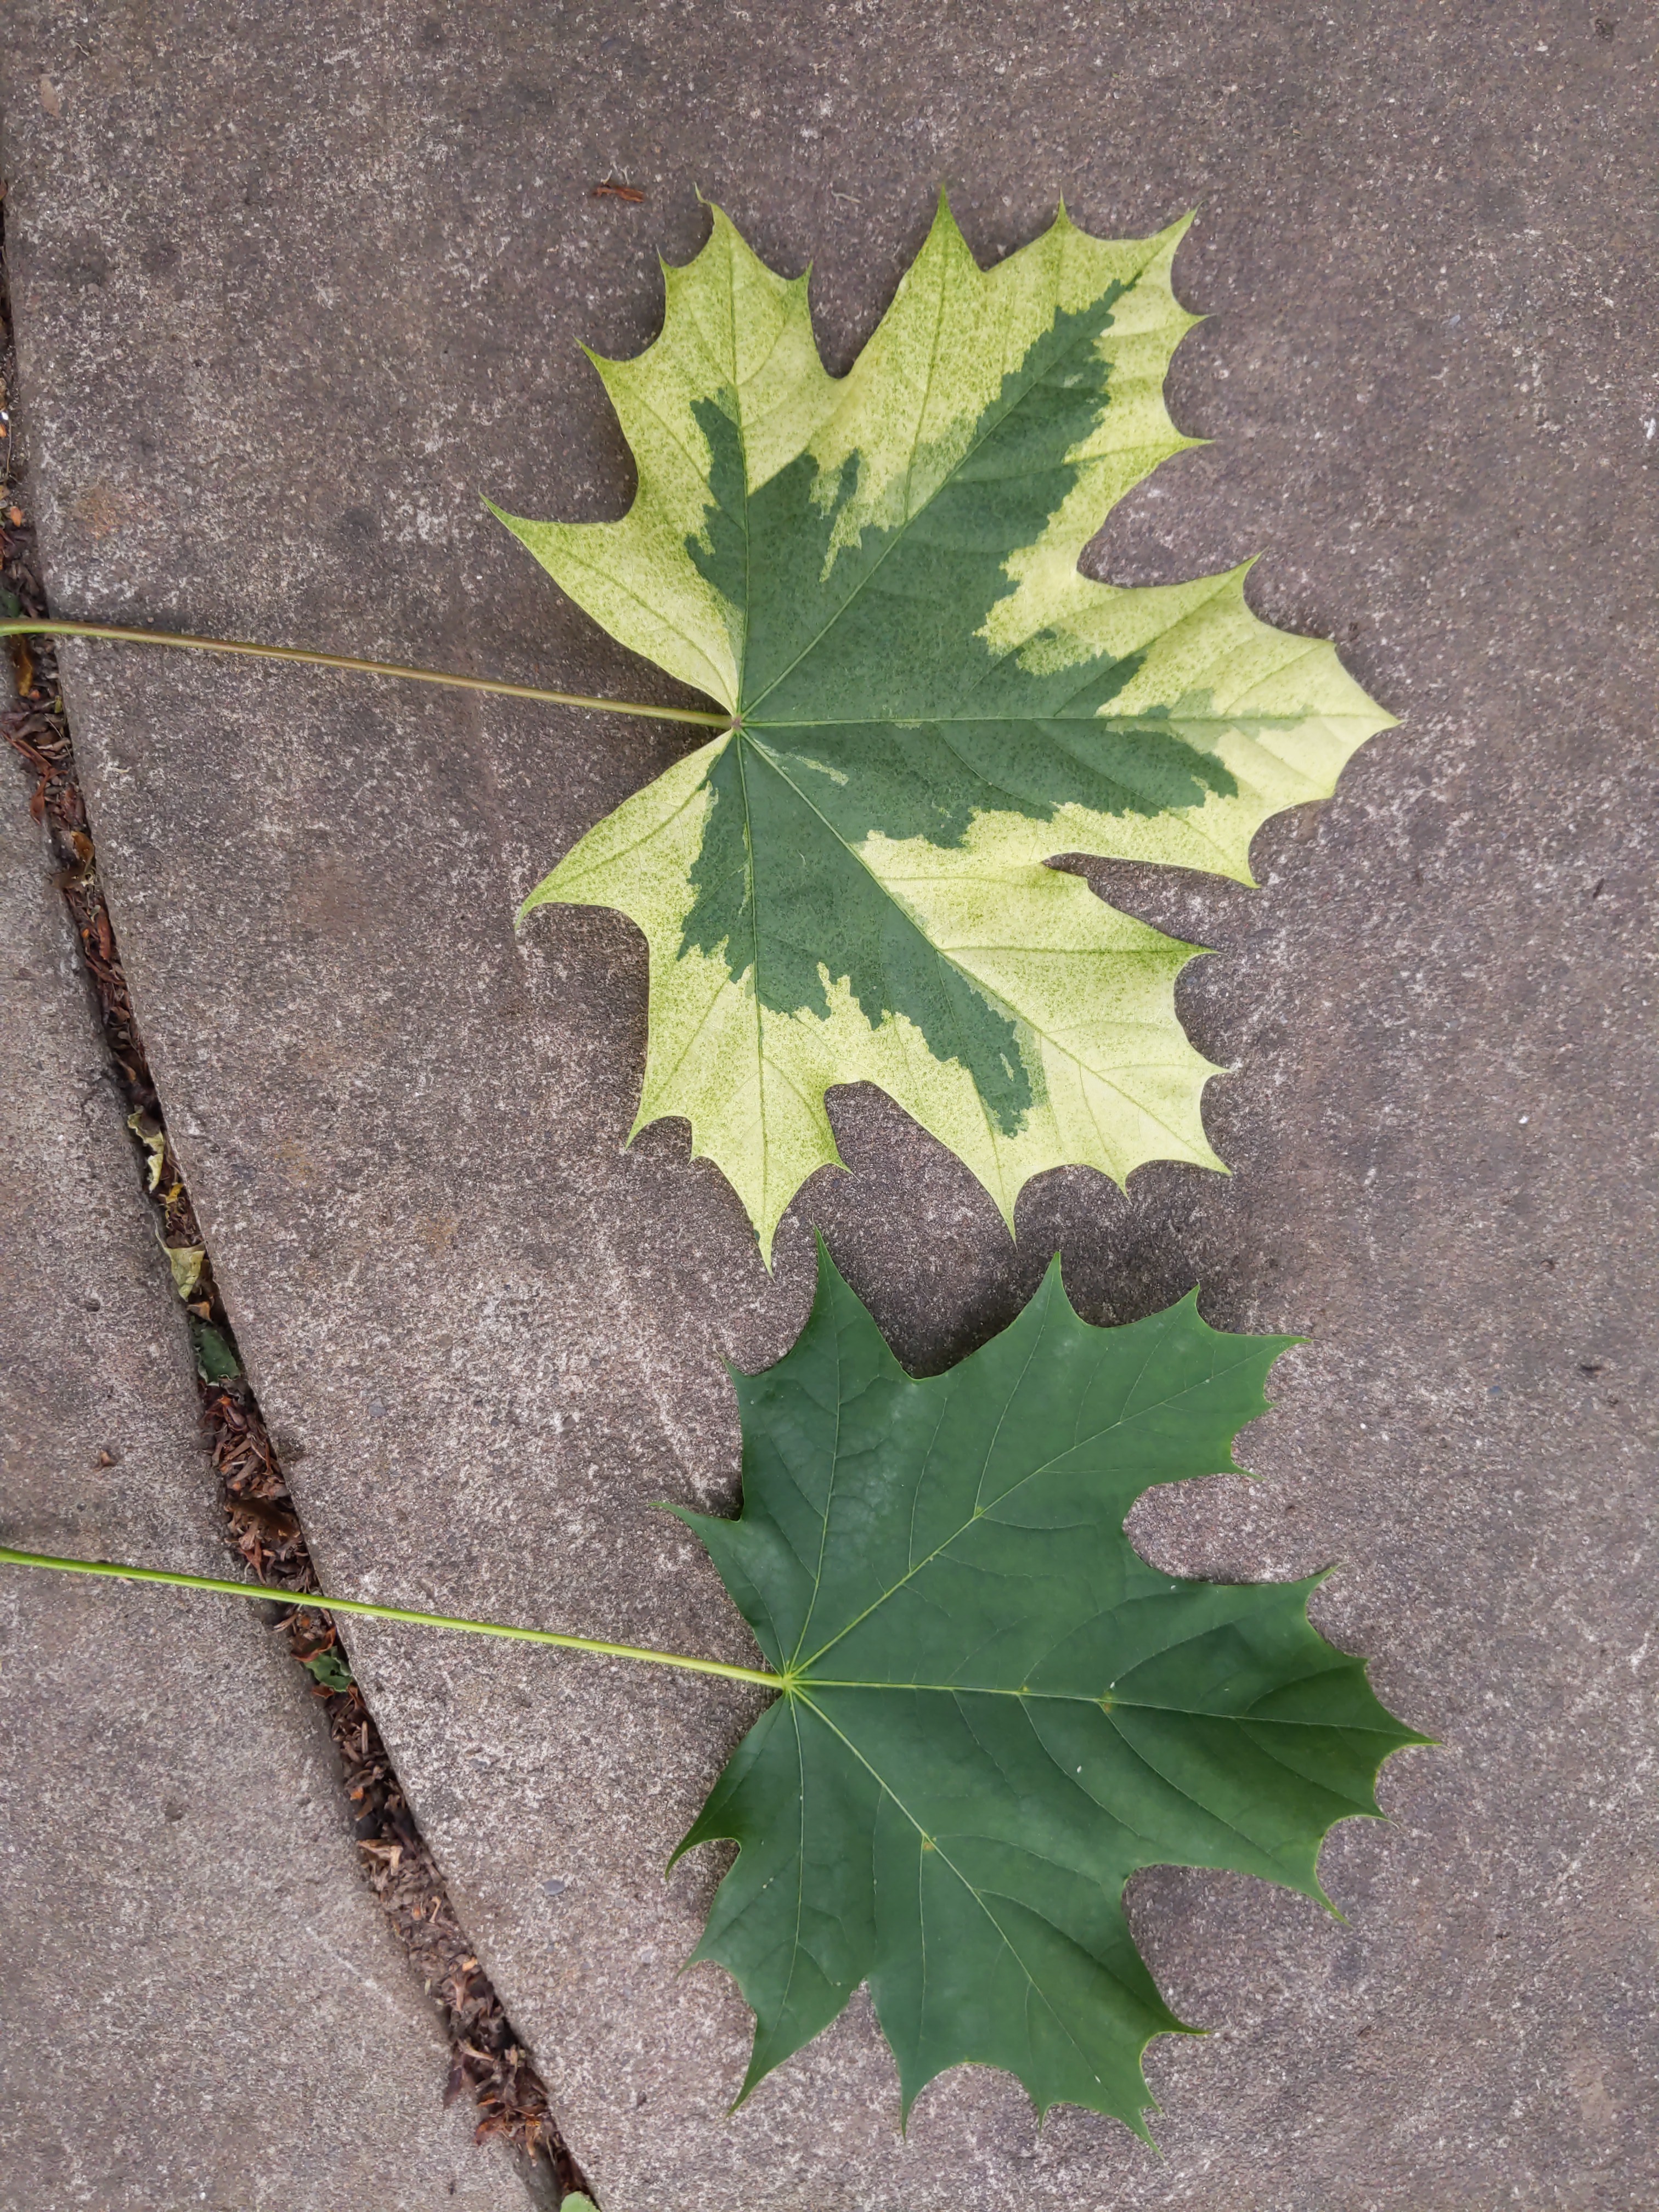 Differences in Maple Tree Foliage